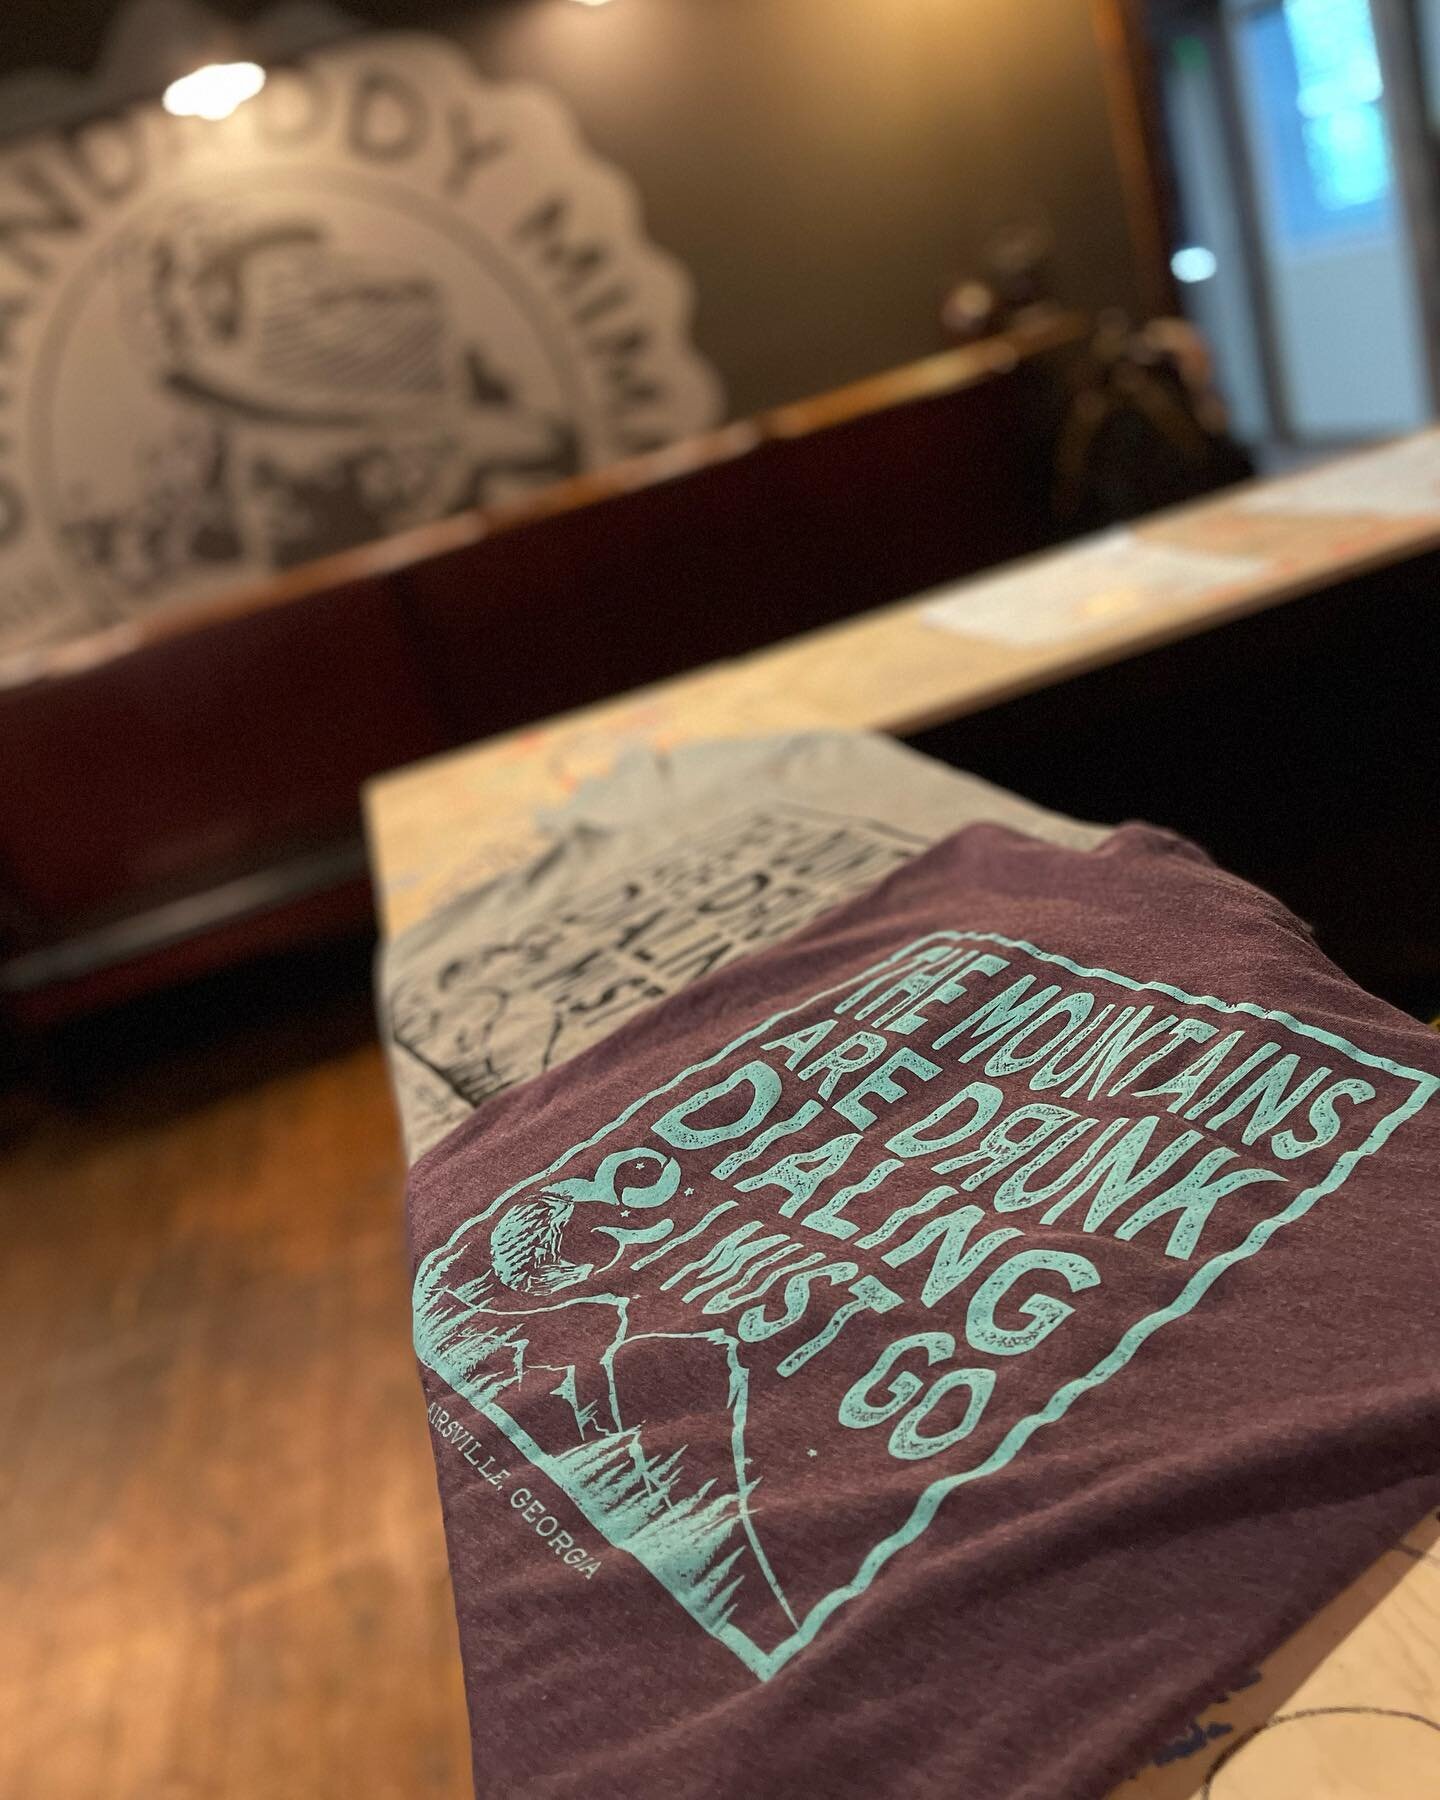 You loved our staff MM&amp;M shirts, so we thought we&rsquo;d let you get in on the fun! 

AVAILABLE NOW: The Mountains Are Drunk Dialing &amp; I Must Go tees at GDM! TWO color options (gray/black &amp; purple/teal). Hurry in because we know these wi